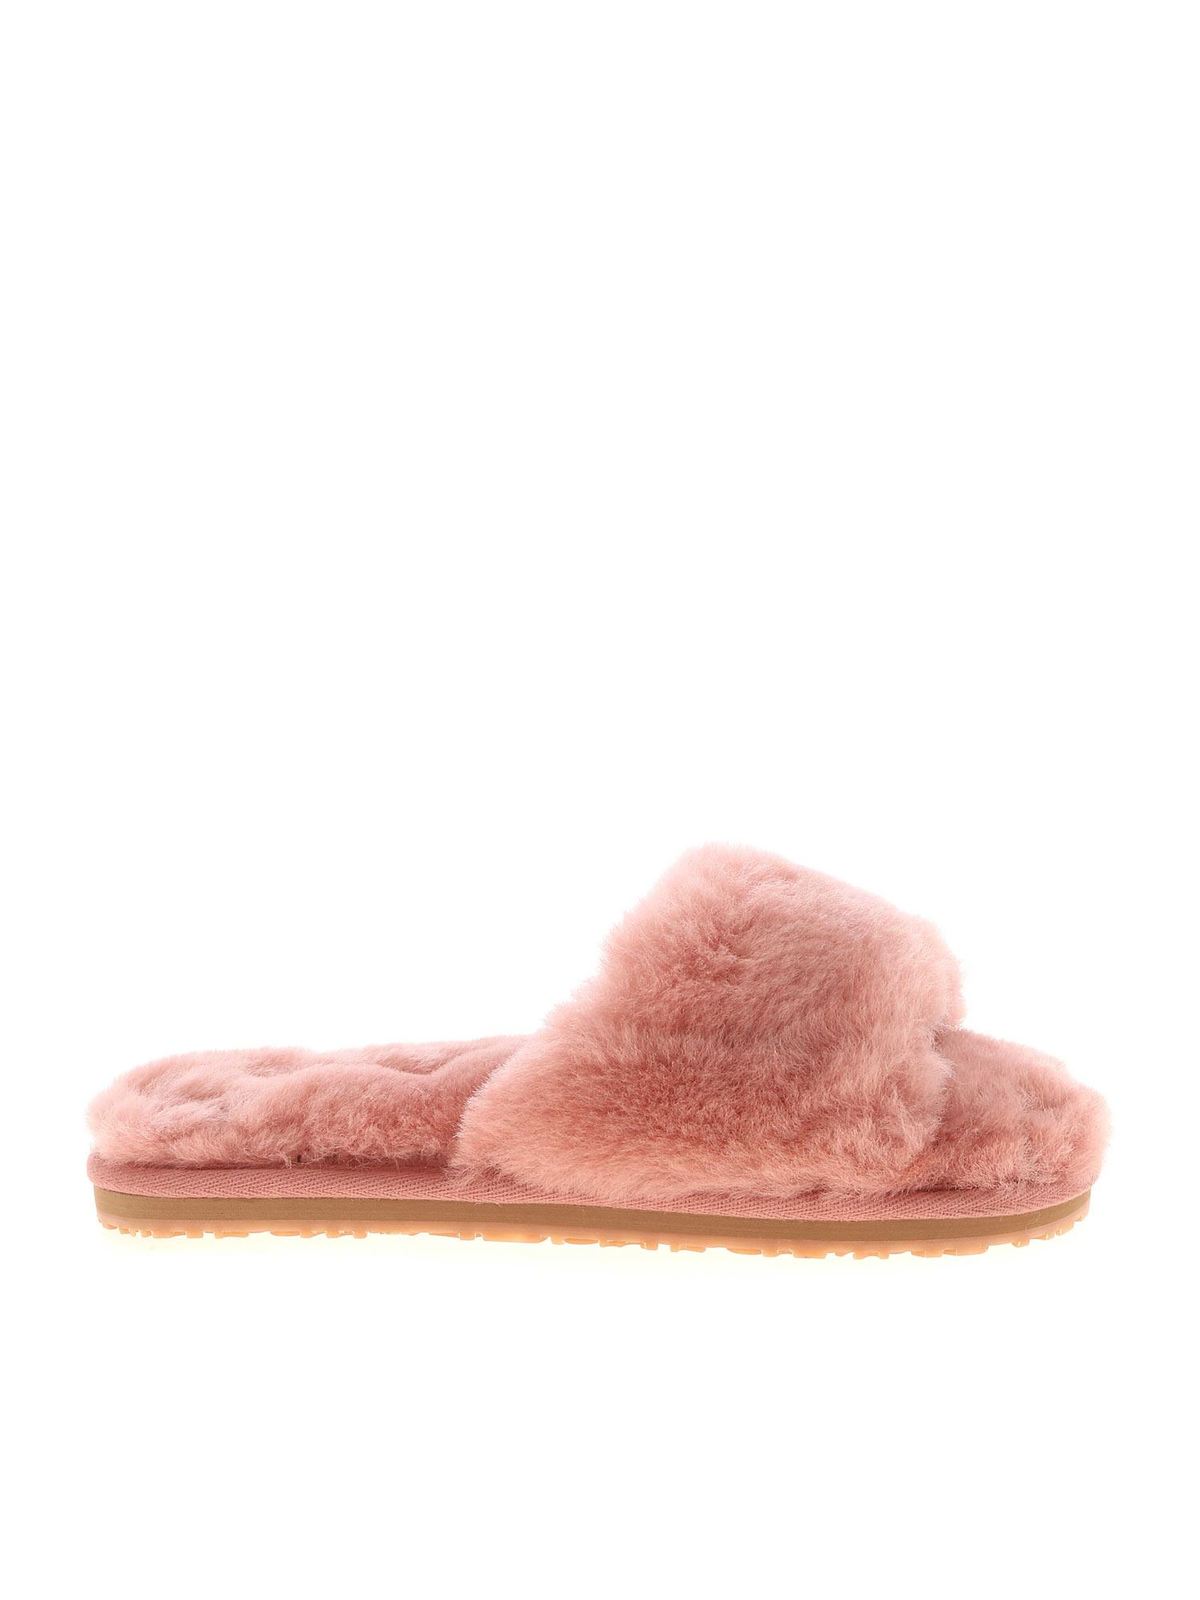 Mou Sheepskin Slippers In Antique Pink | ModeSens